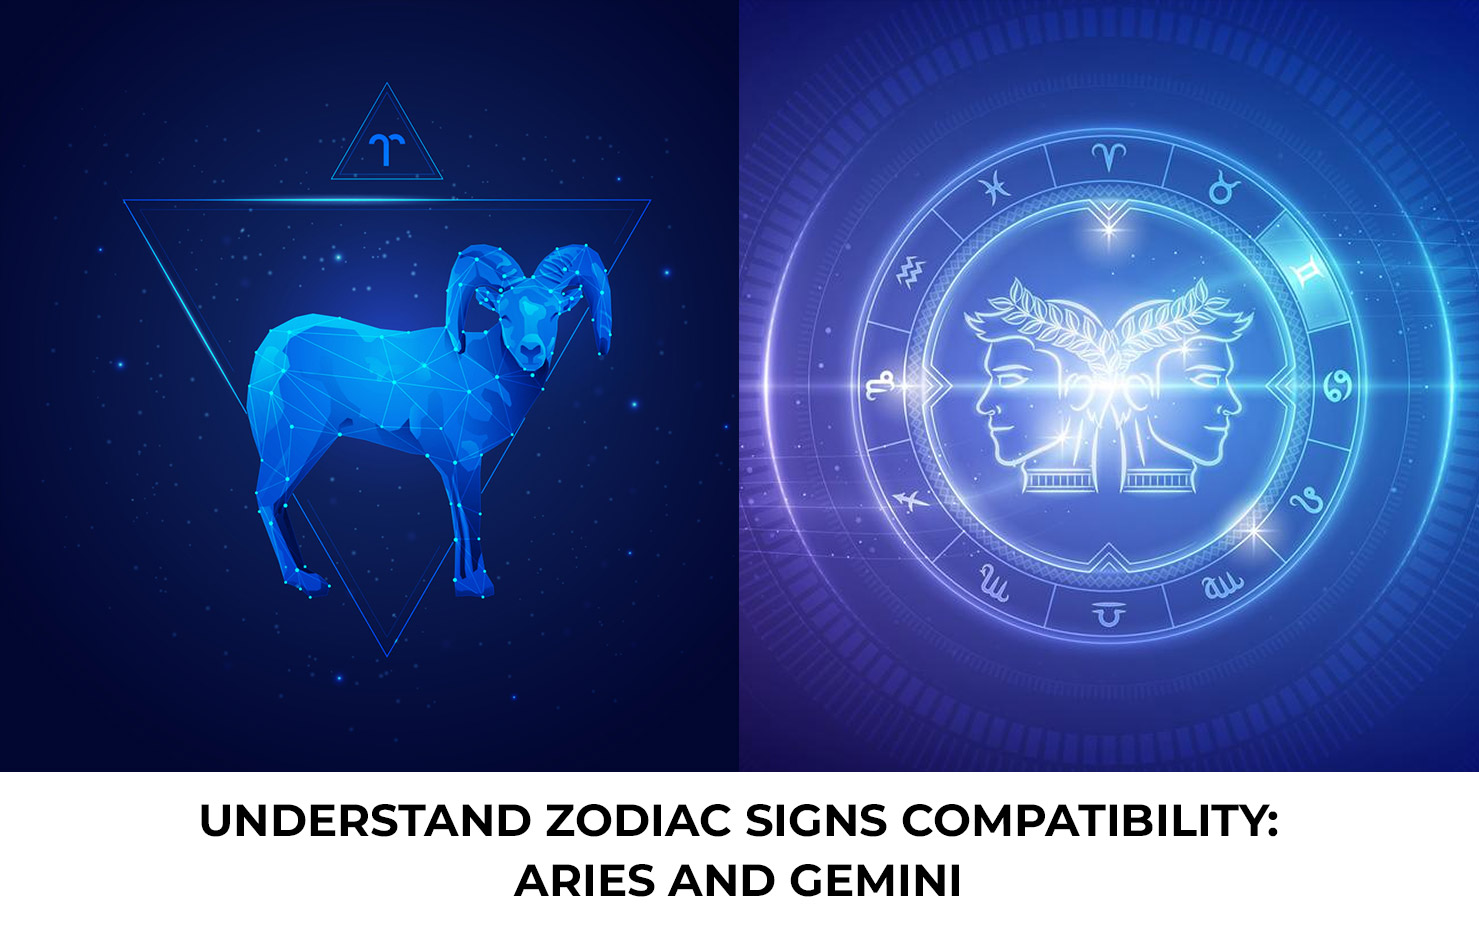 Understand Zodiac Signs Compatibility: Aries and Gemini